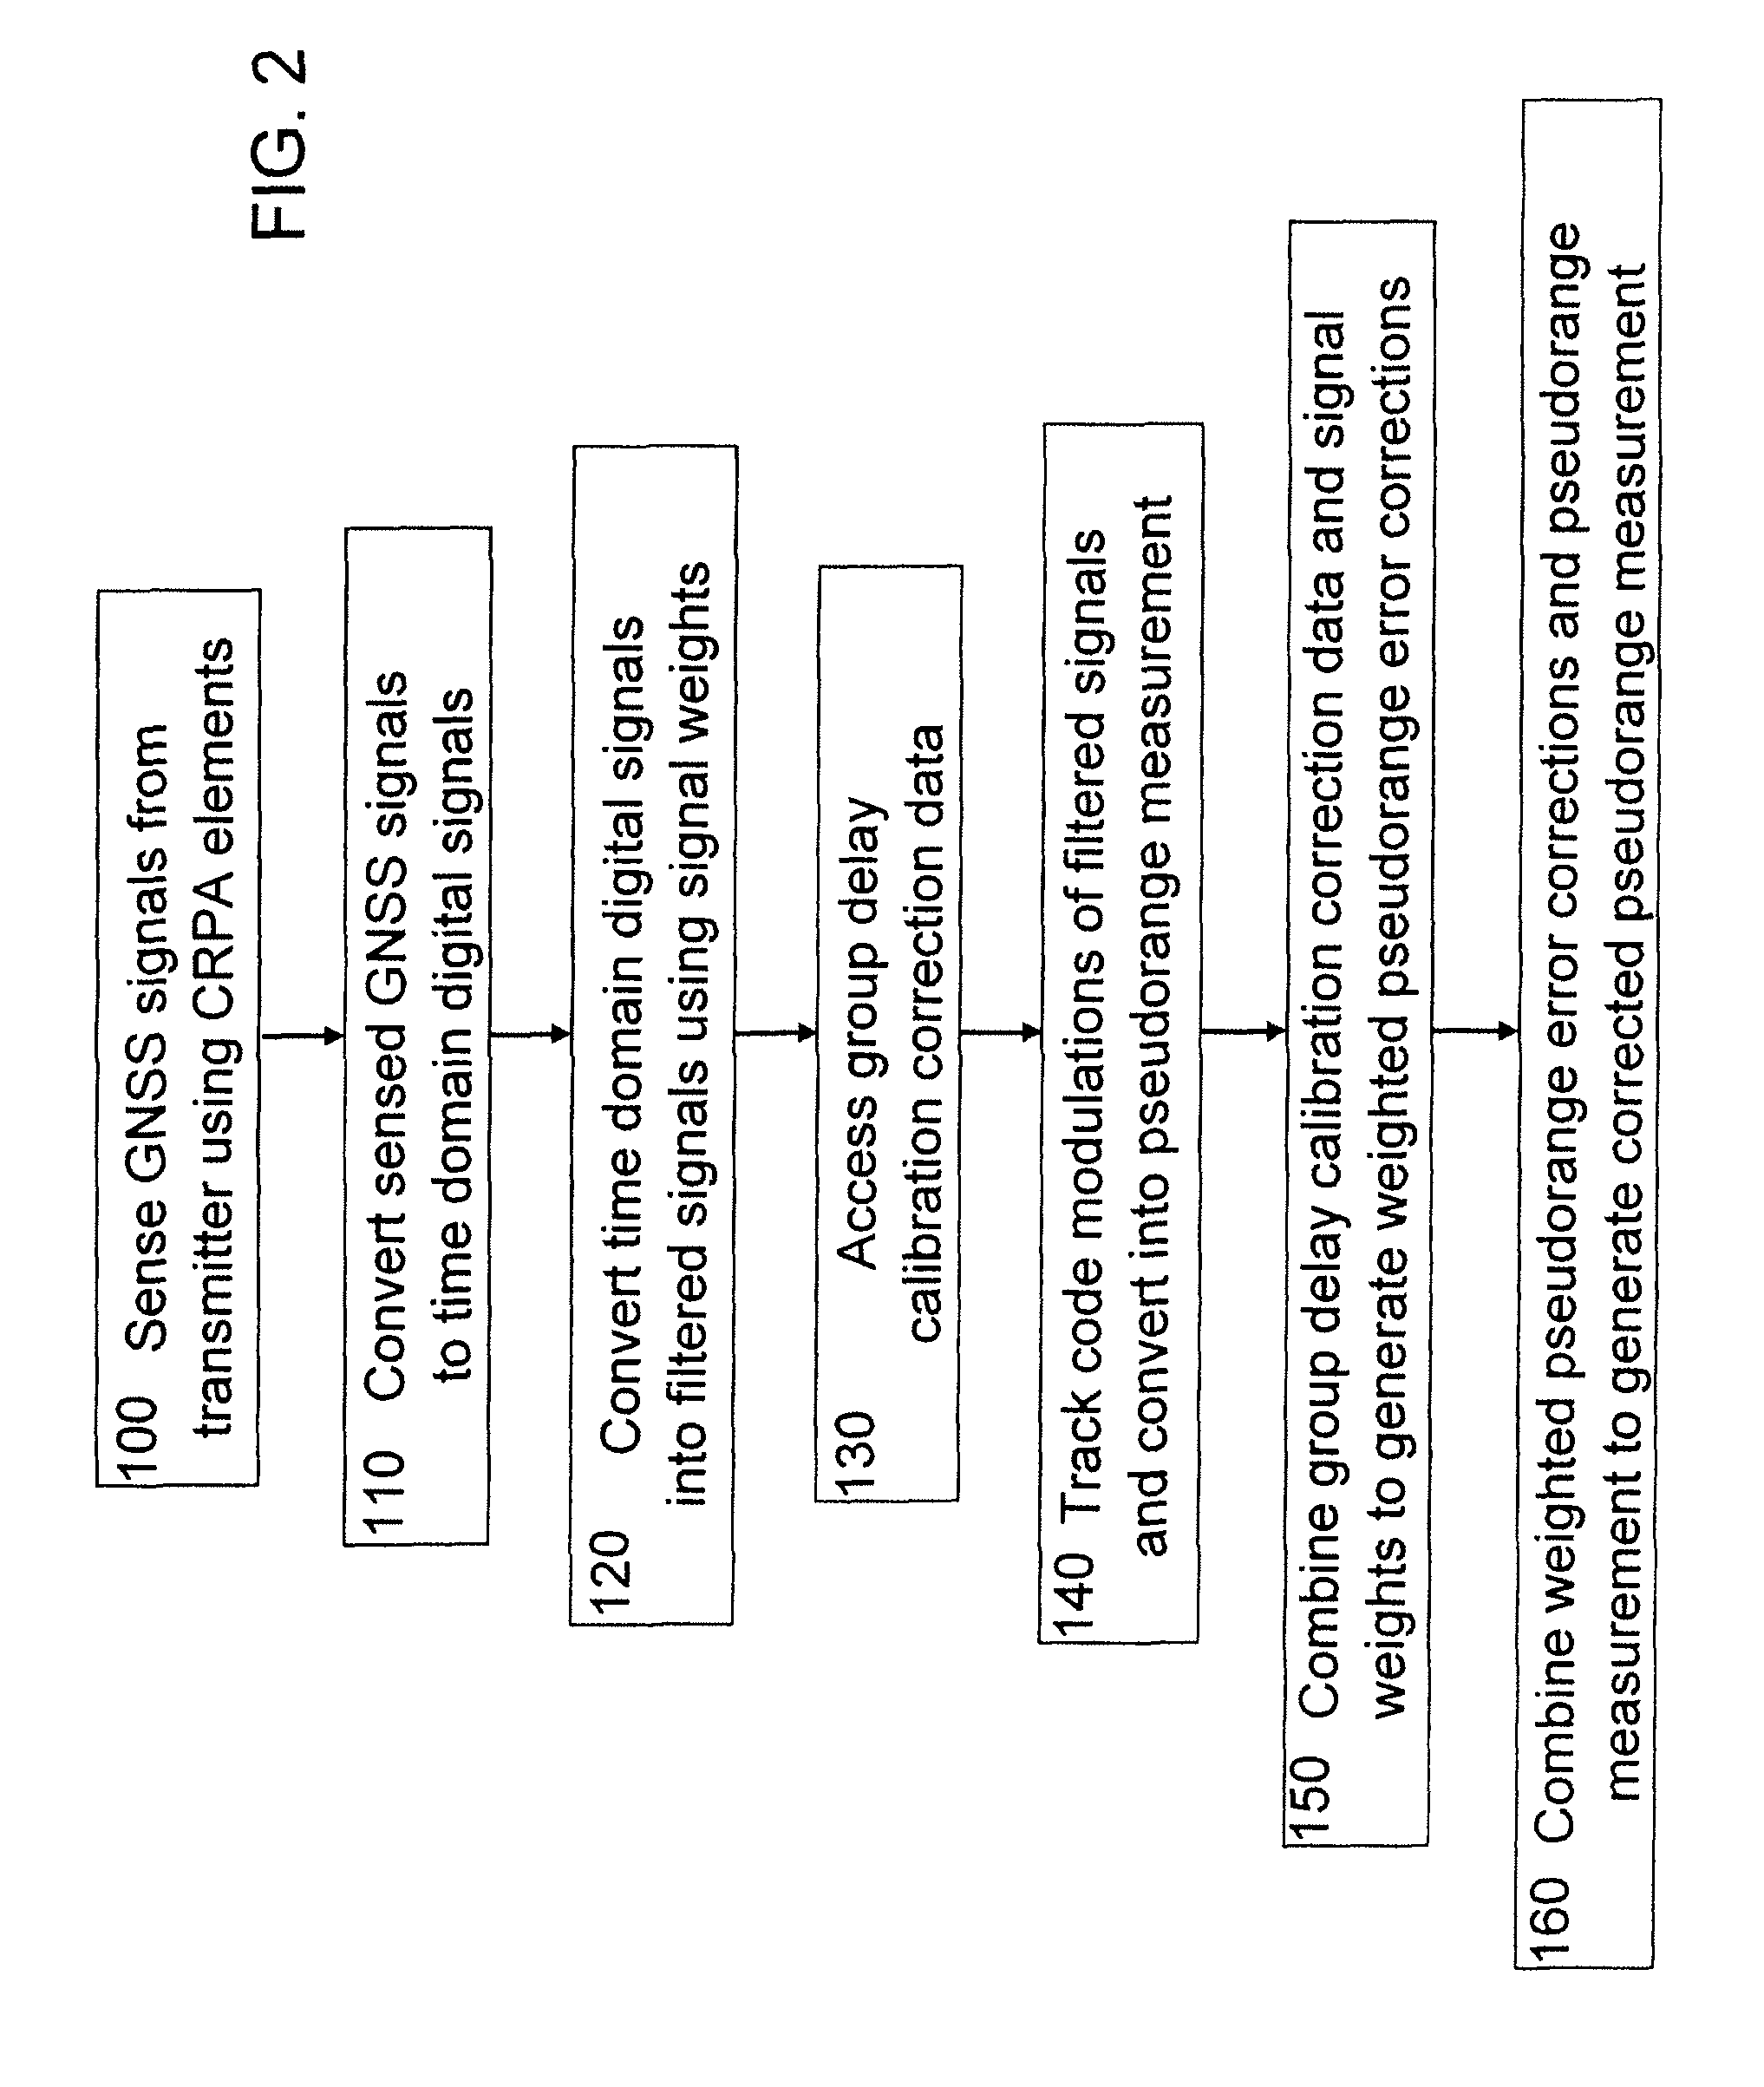 System and method for correcting global navigation satellite system pseudorange measurements in receivers having controlled reception pattern antennas